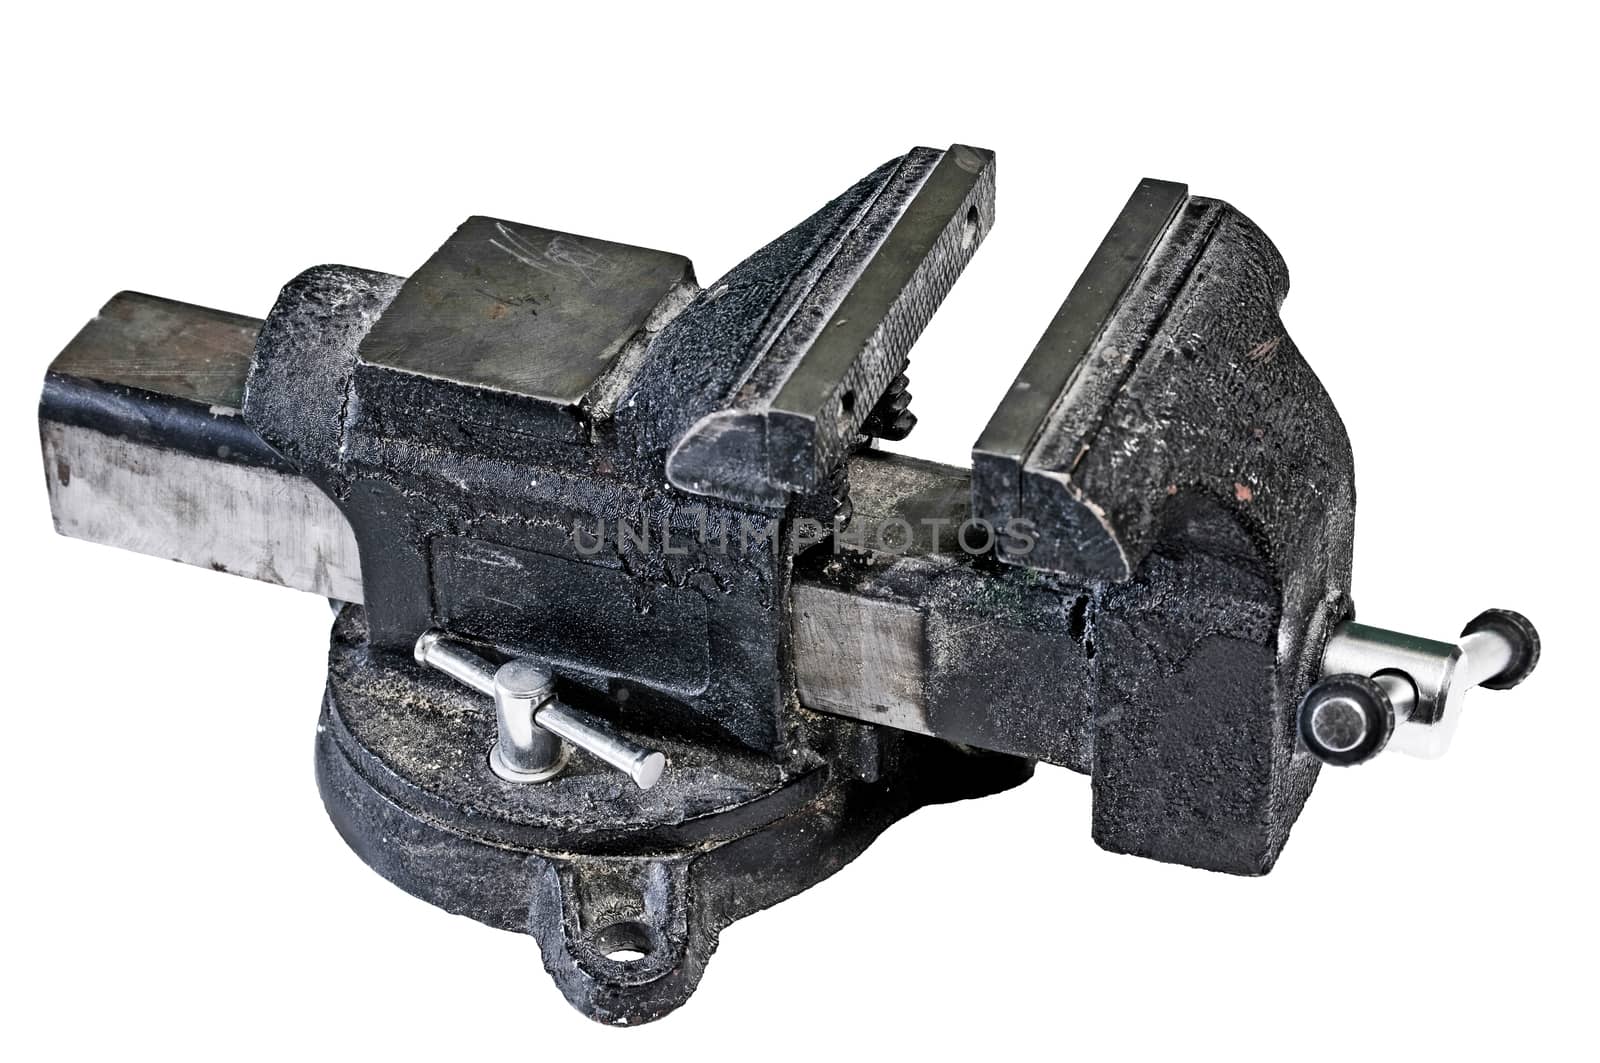 An open vise isolated on pure white